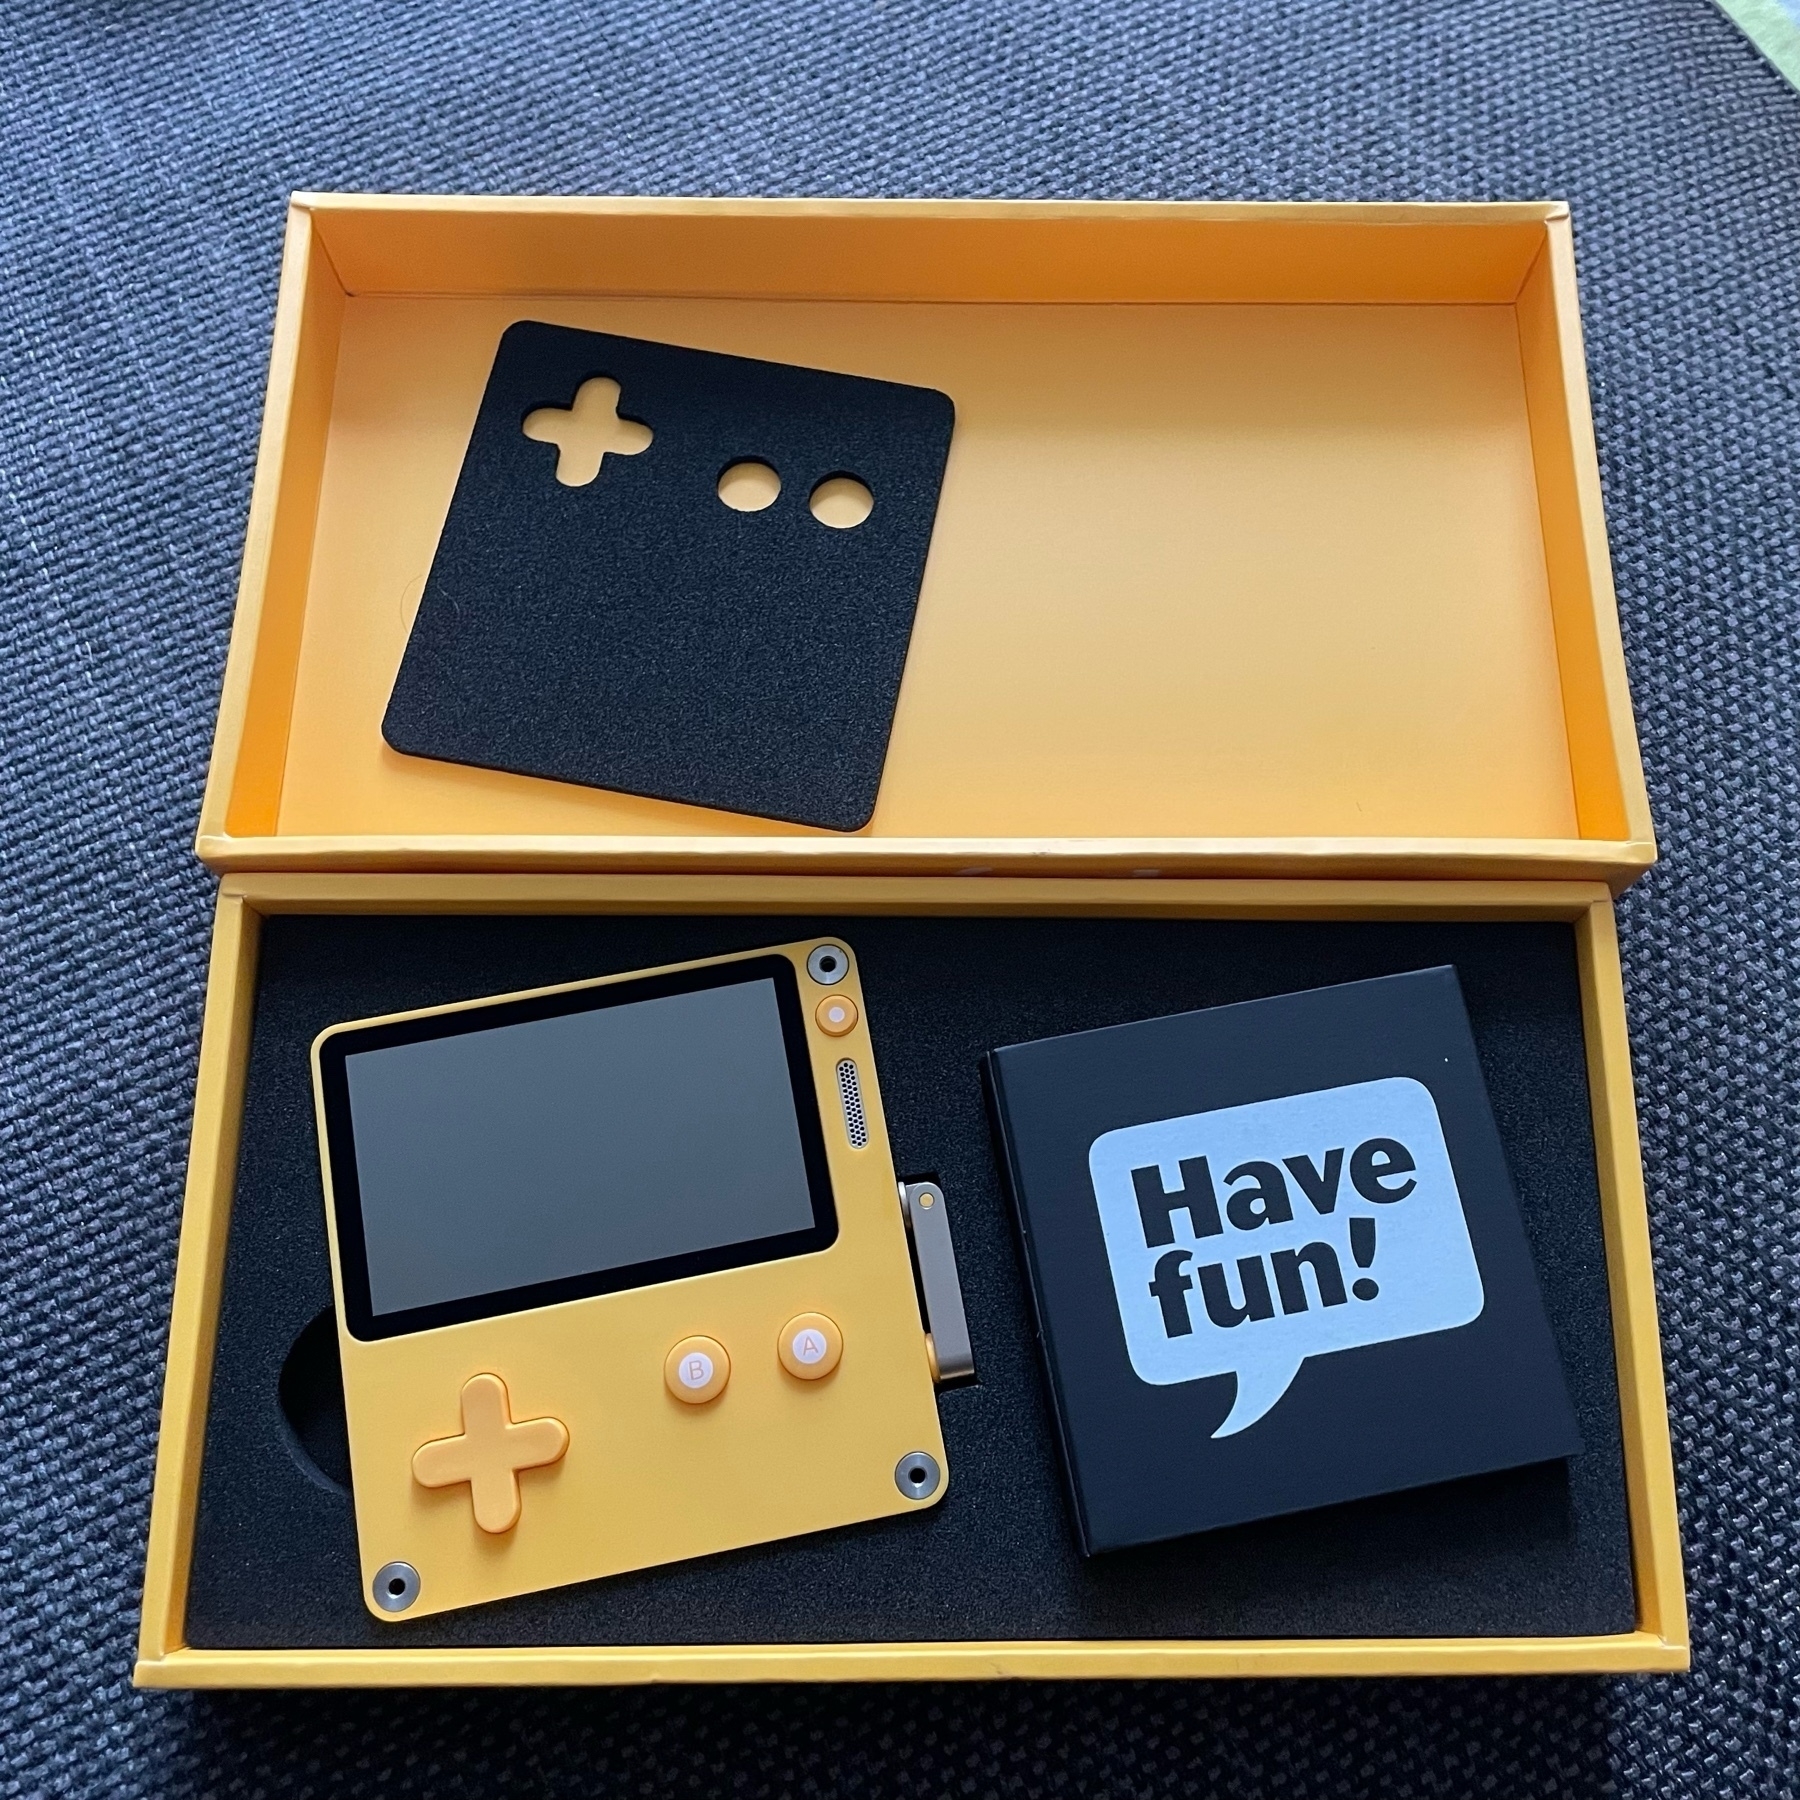 An opened yellow cardboard box, revealing the Playdate game console and a small box of accessories that say "Have fun!" on the front.